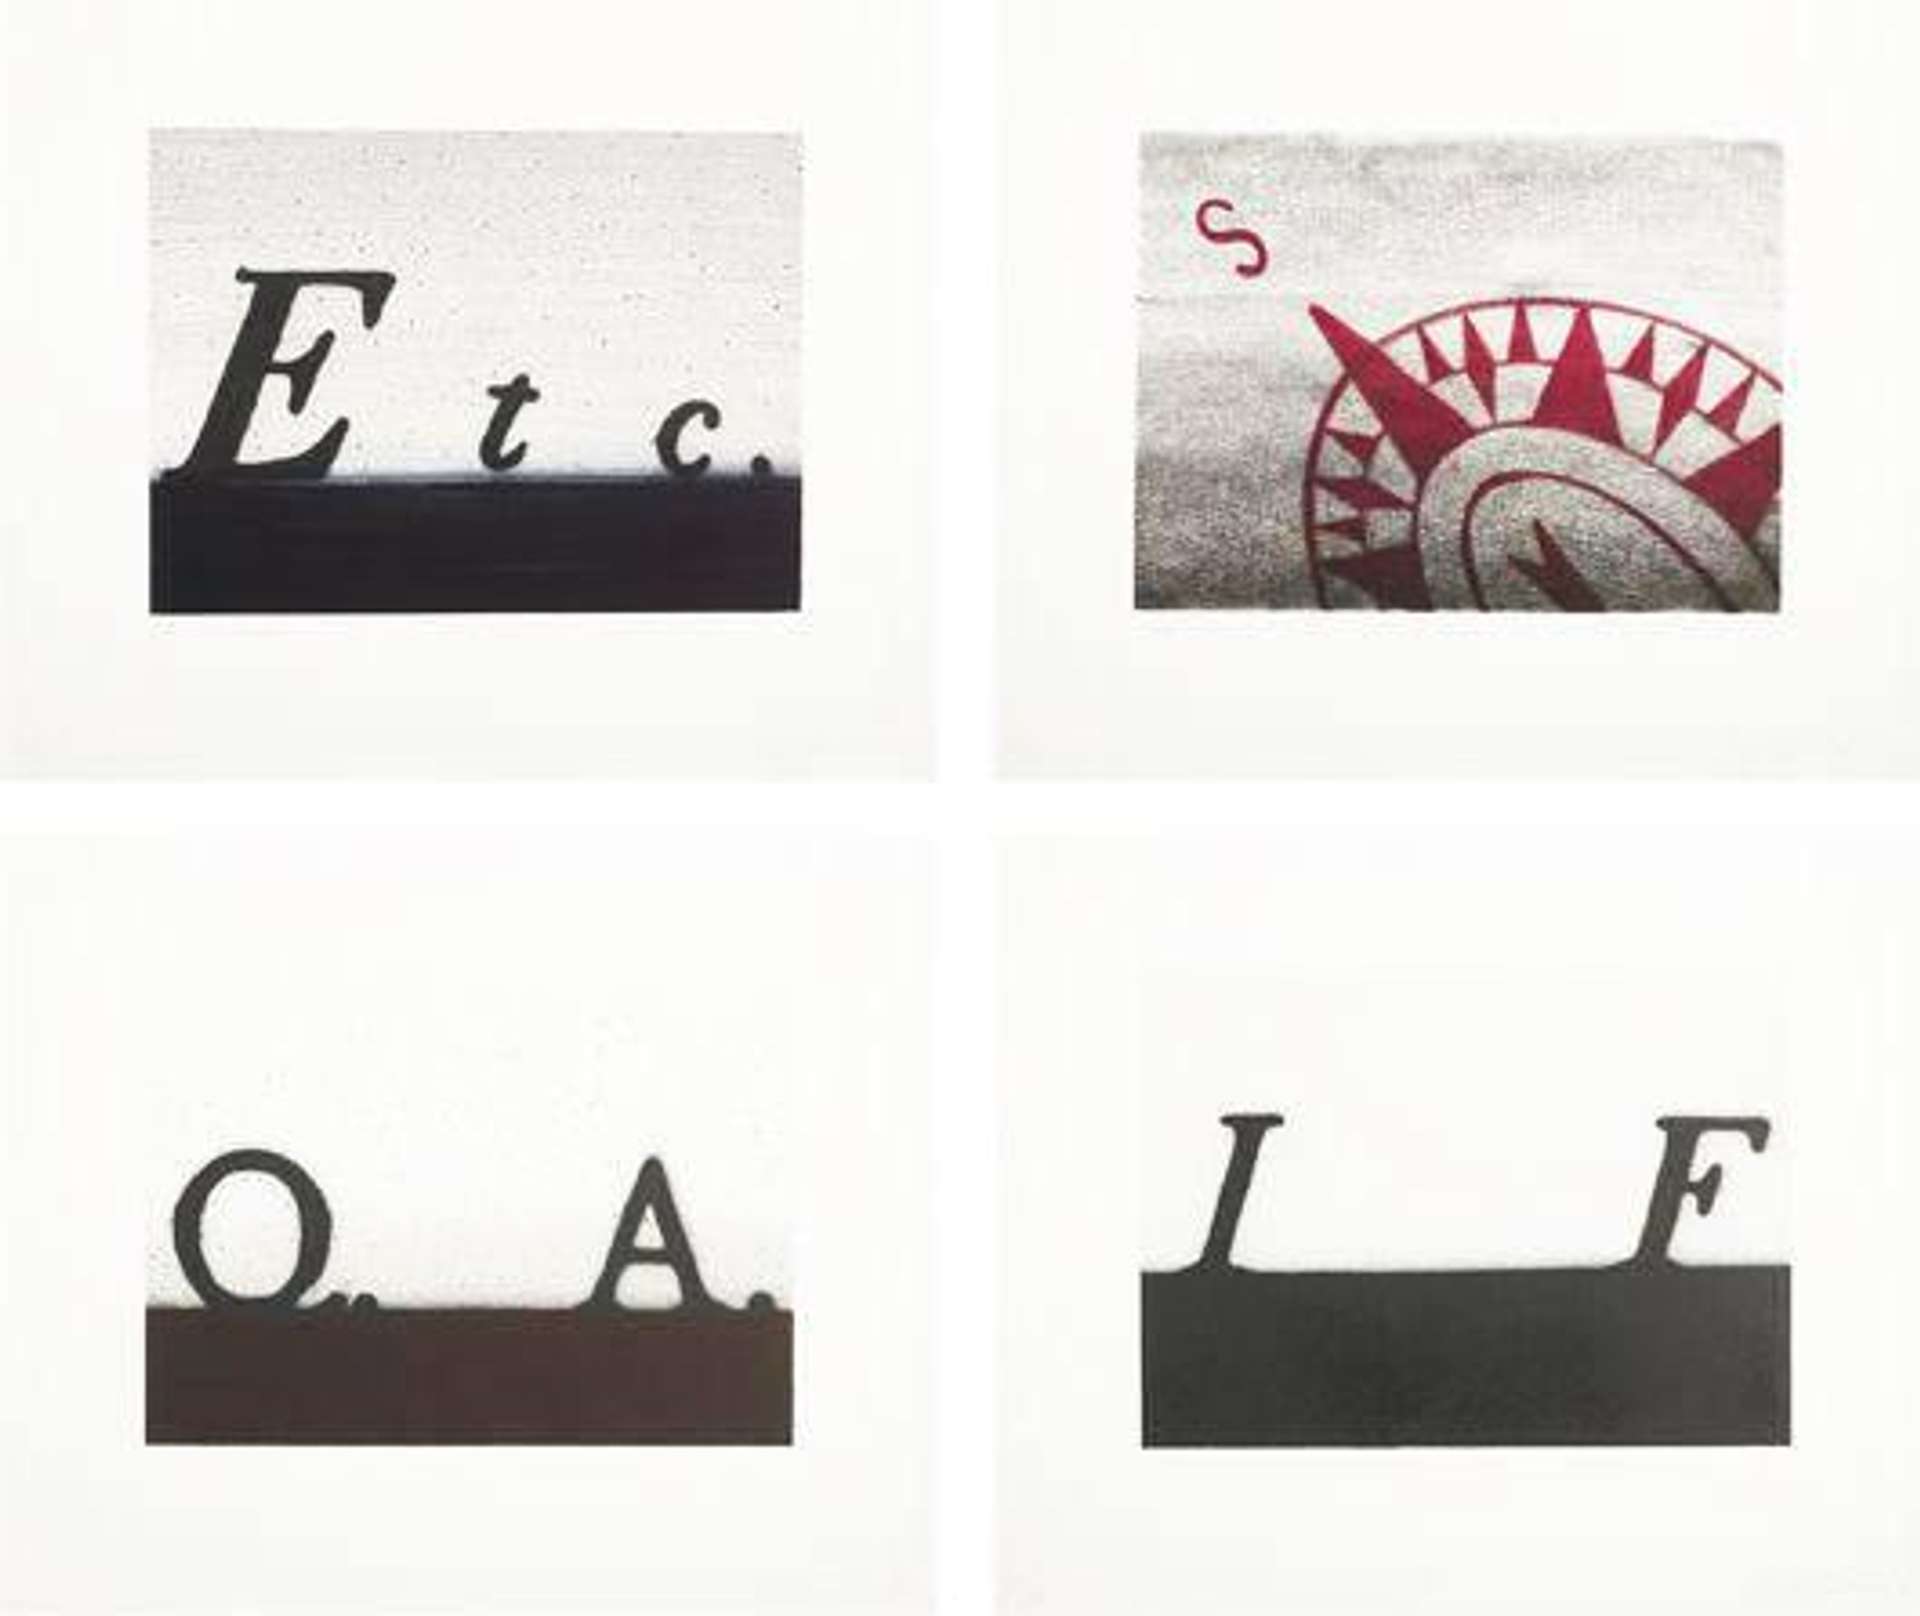 Etc, If, South And Q & A (complete set) - Signed Print by Ed Ruscha 1991 - MyArtBroker